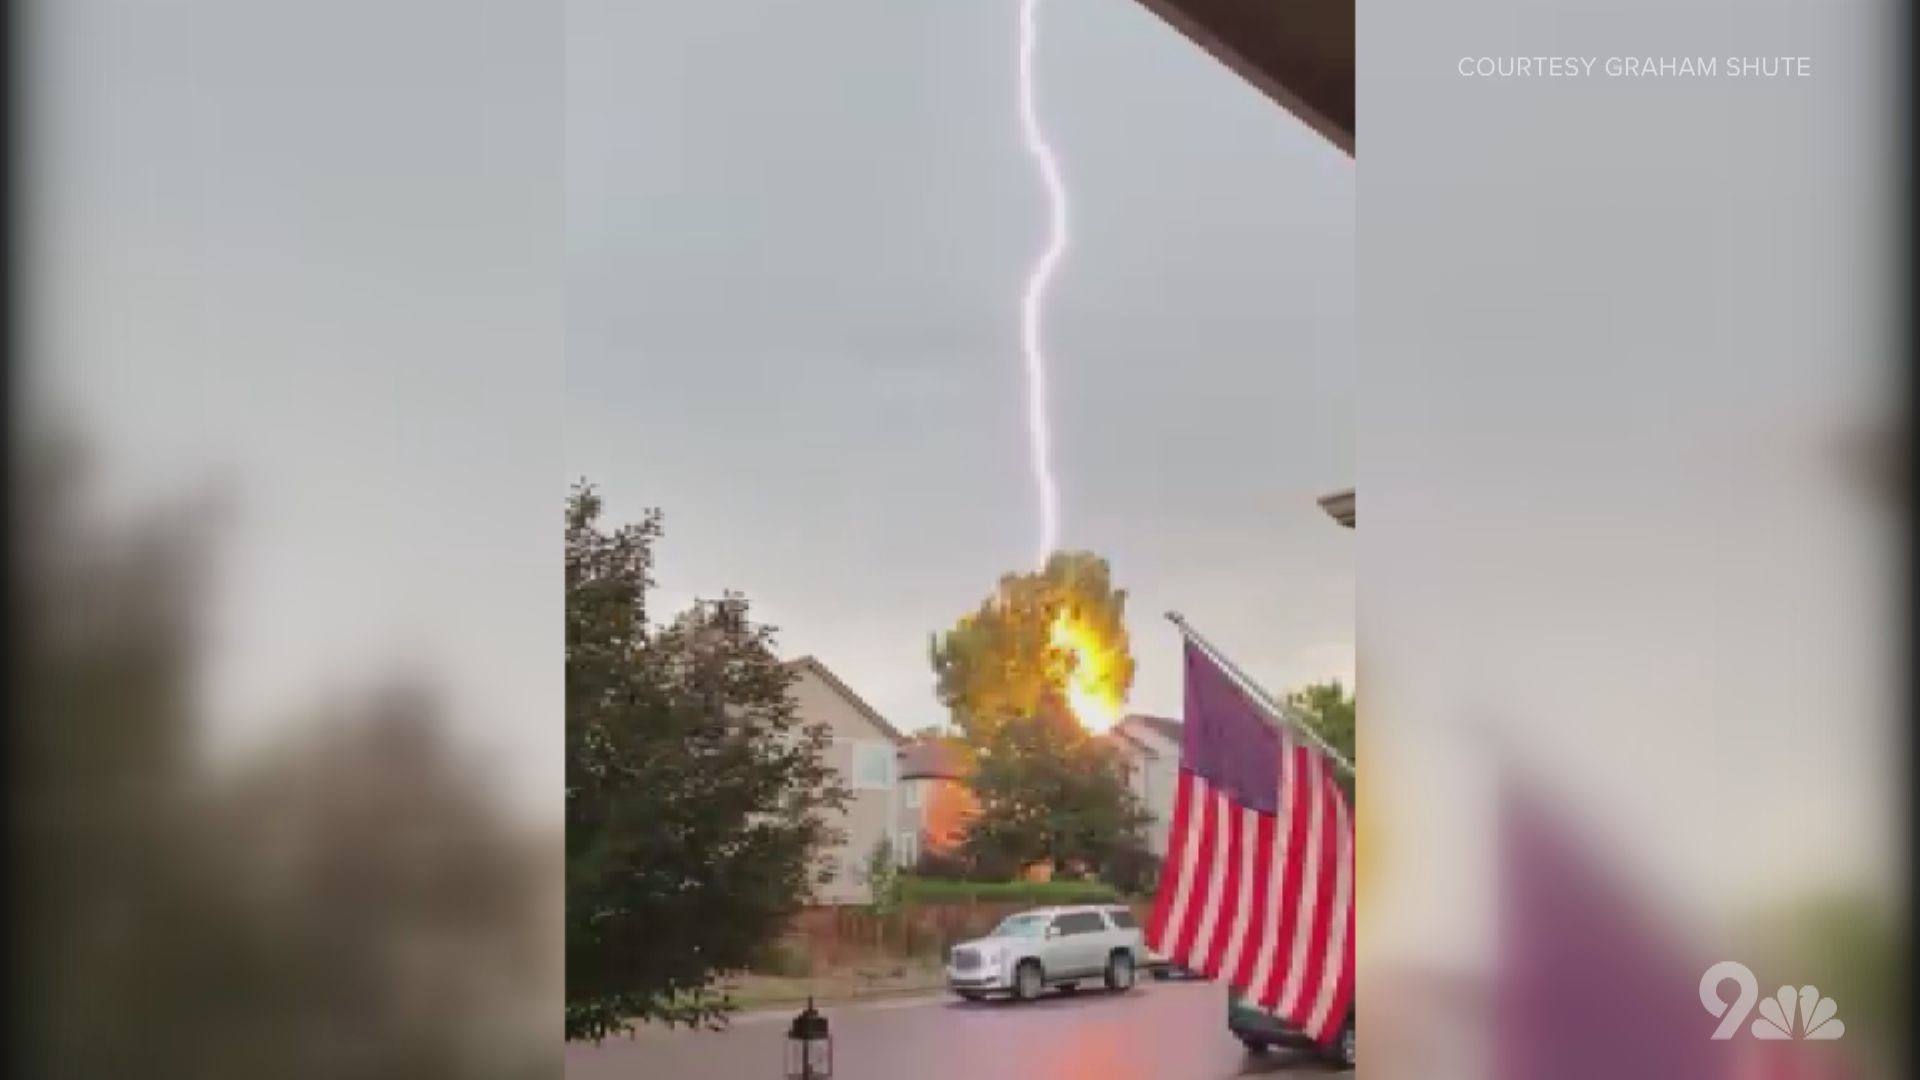 The lightning strike happened shortly after 3 p.m. on the 4th of July. No injuries or damage was reported as a result.